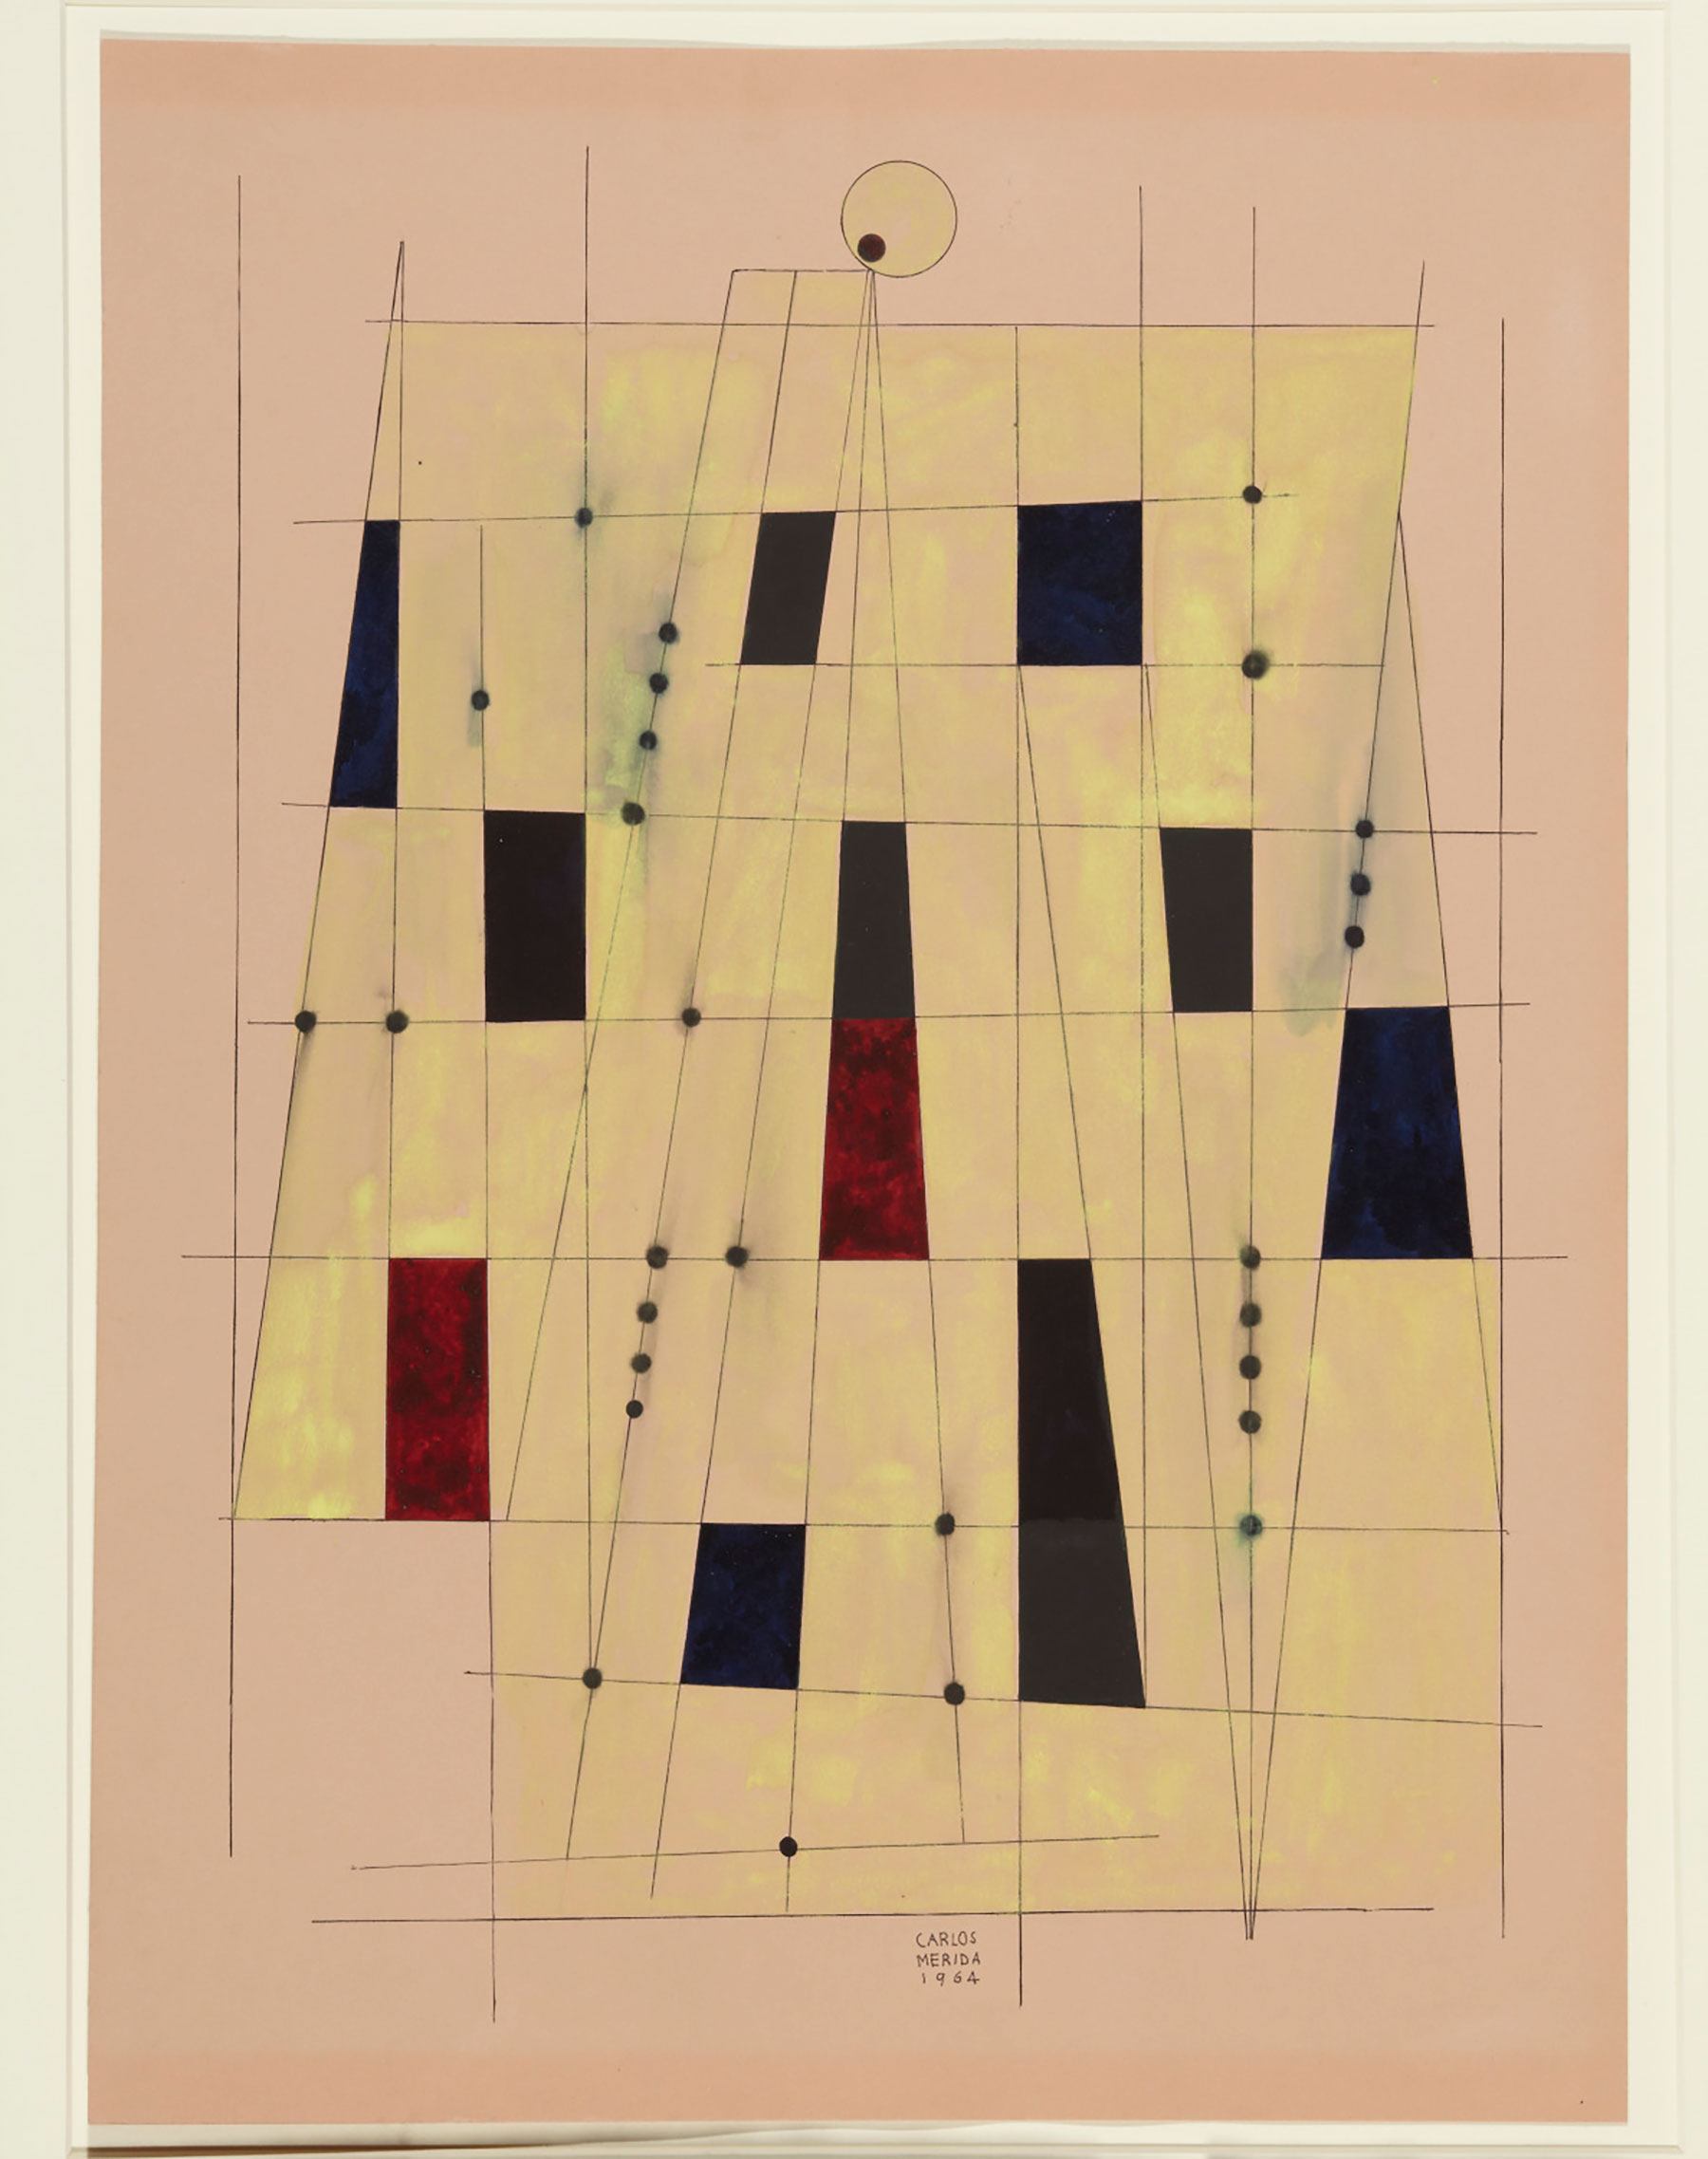 Carlos Mérida, Juego de líneas (Line Game), 1964. Watercolor. Gift of Mr. Edward Jacobson. © 2020 Artists Rights Society (ARS), New York.